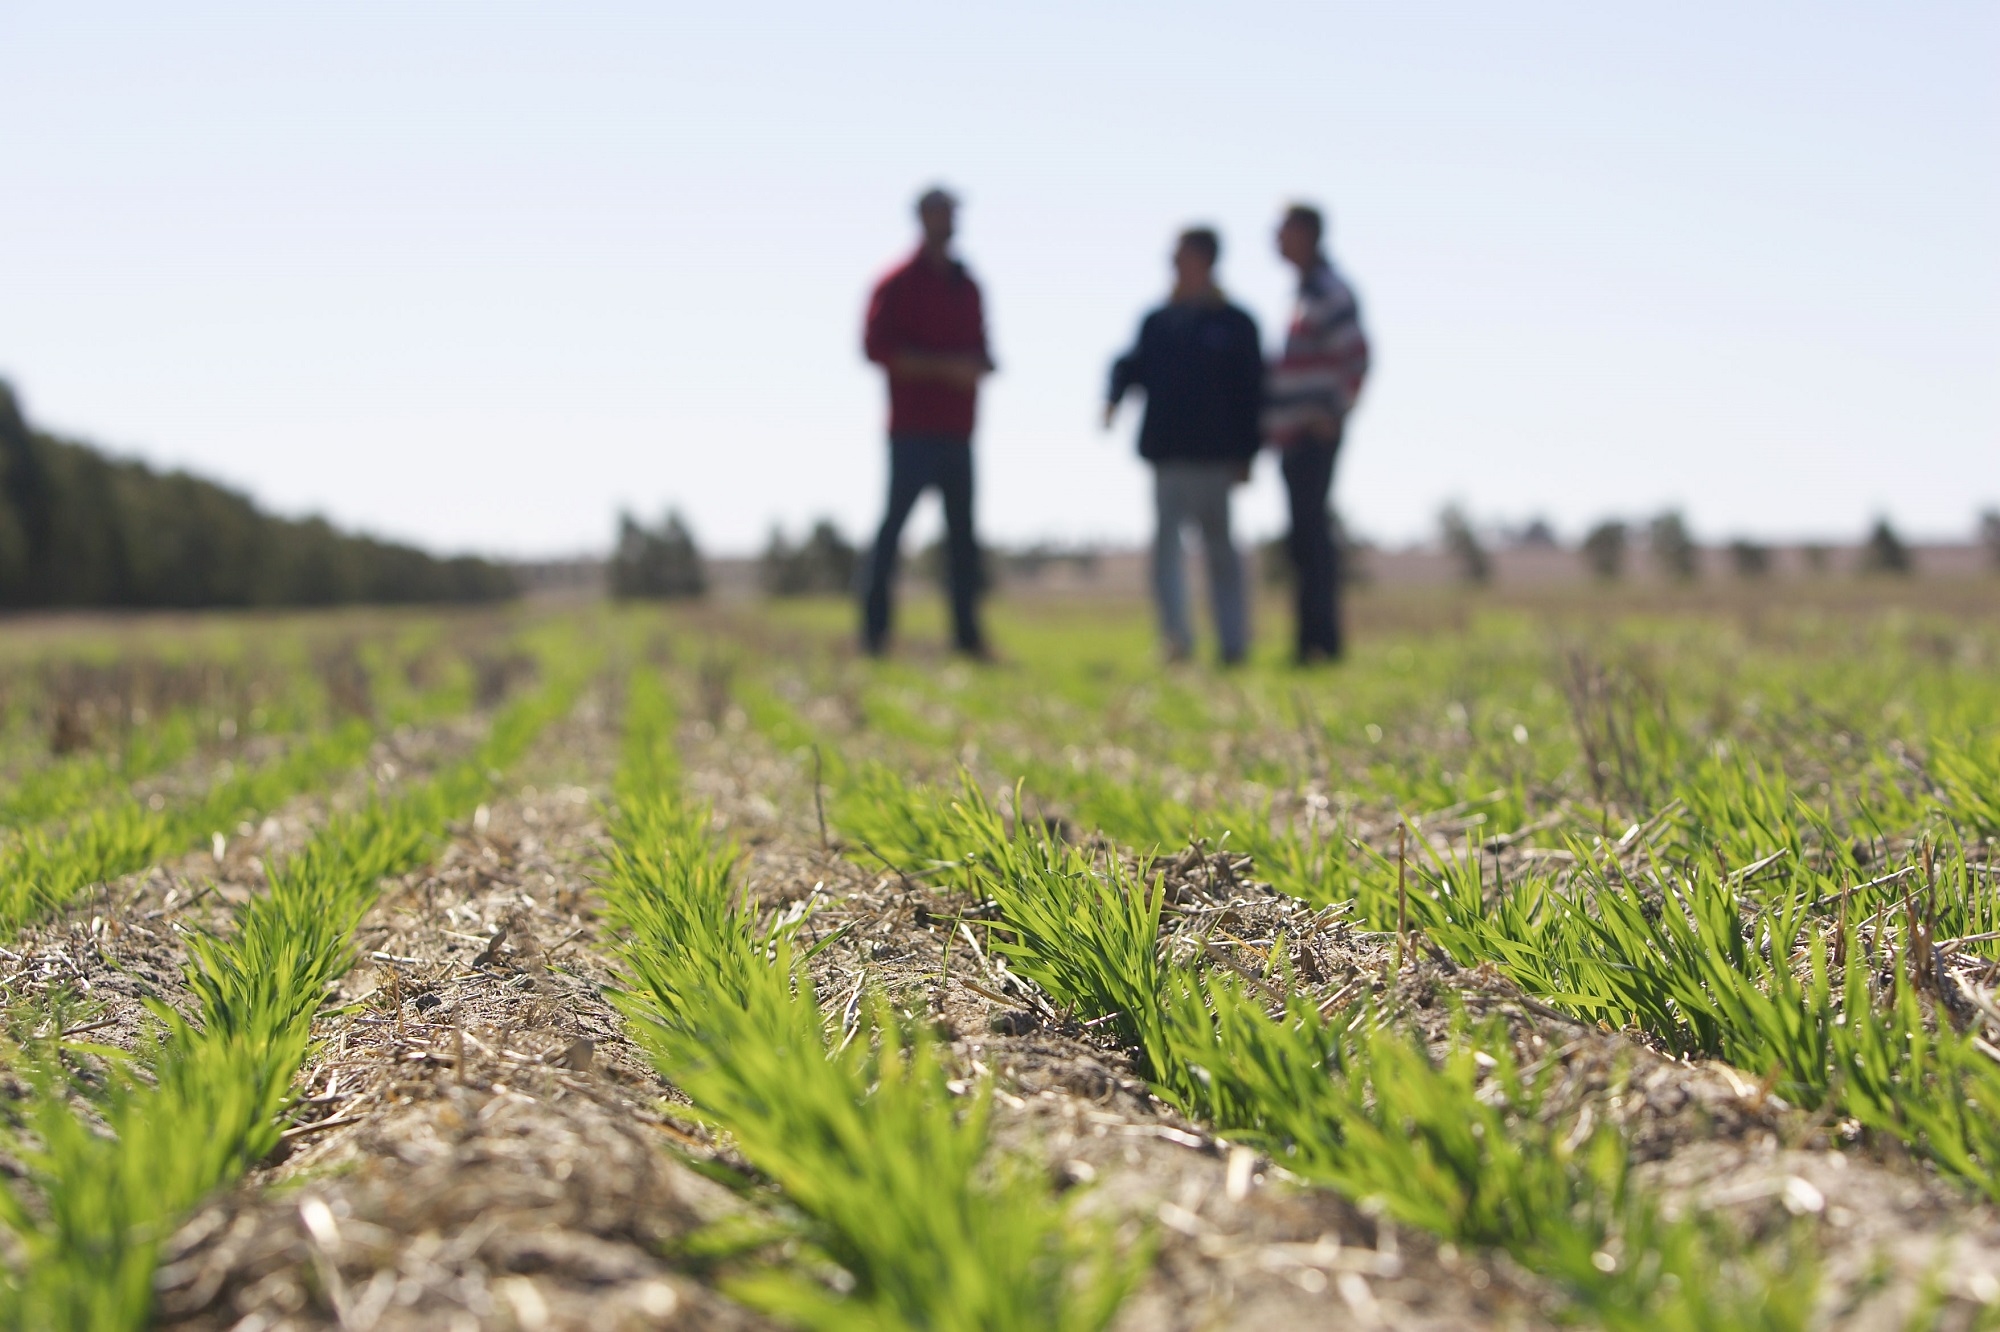 Three people in the background standing in a paddock with a newly emerged green crop